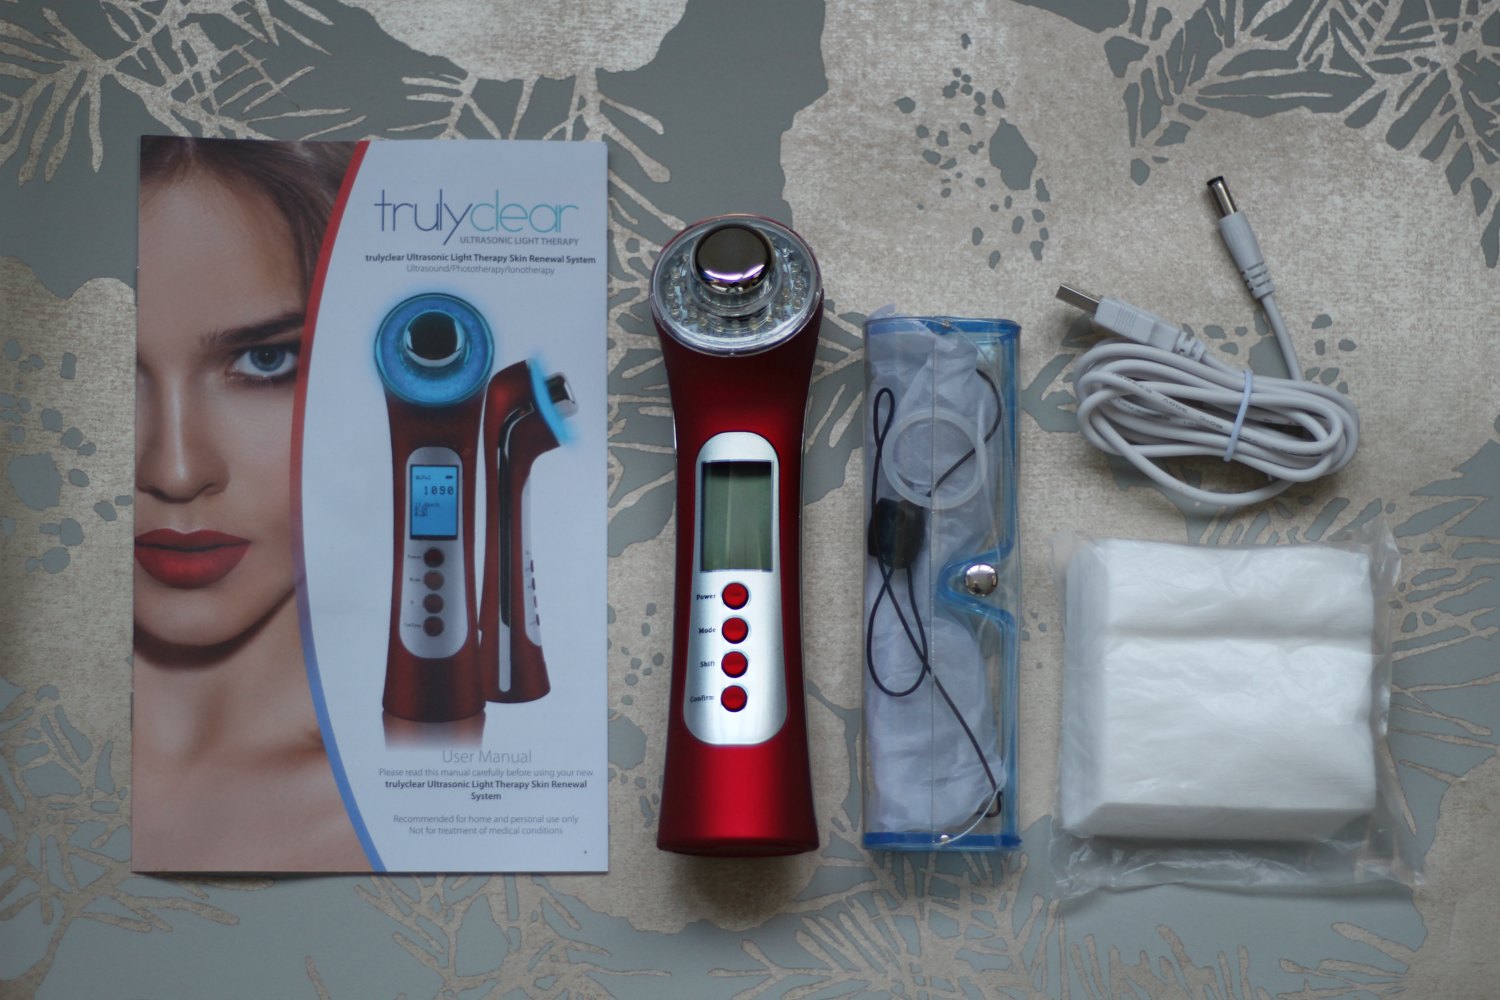 Trulyclear 2 light therapy system review